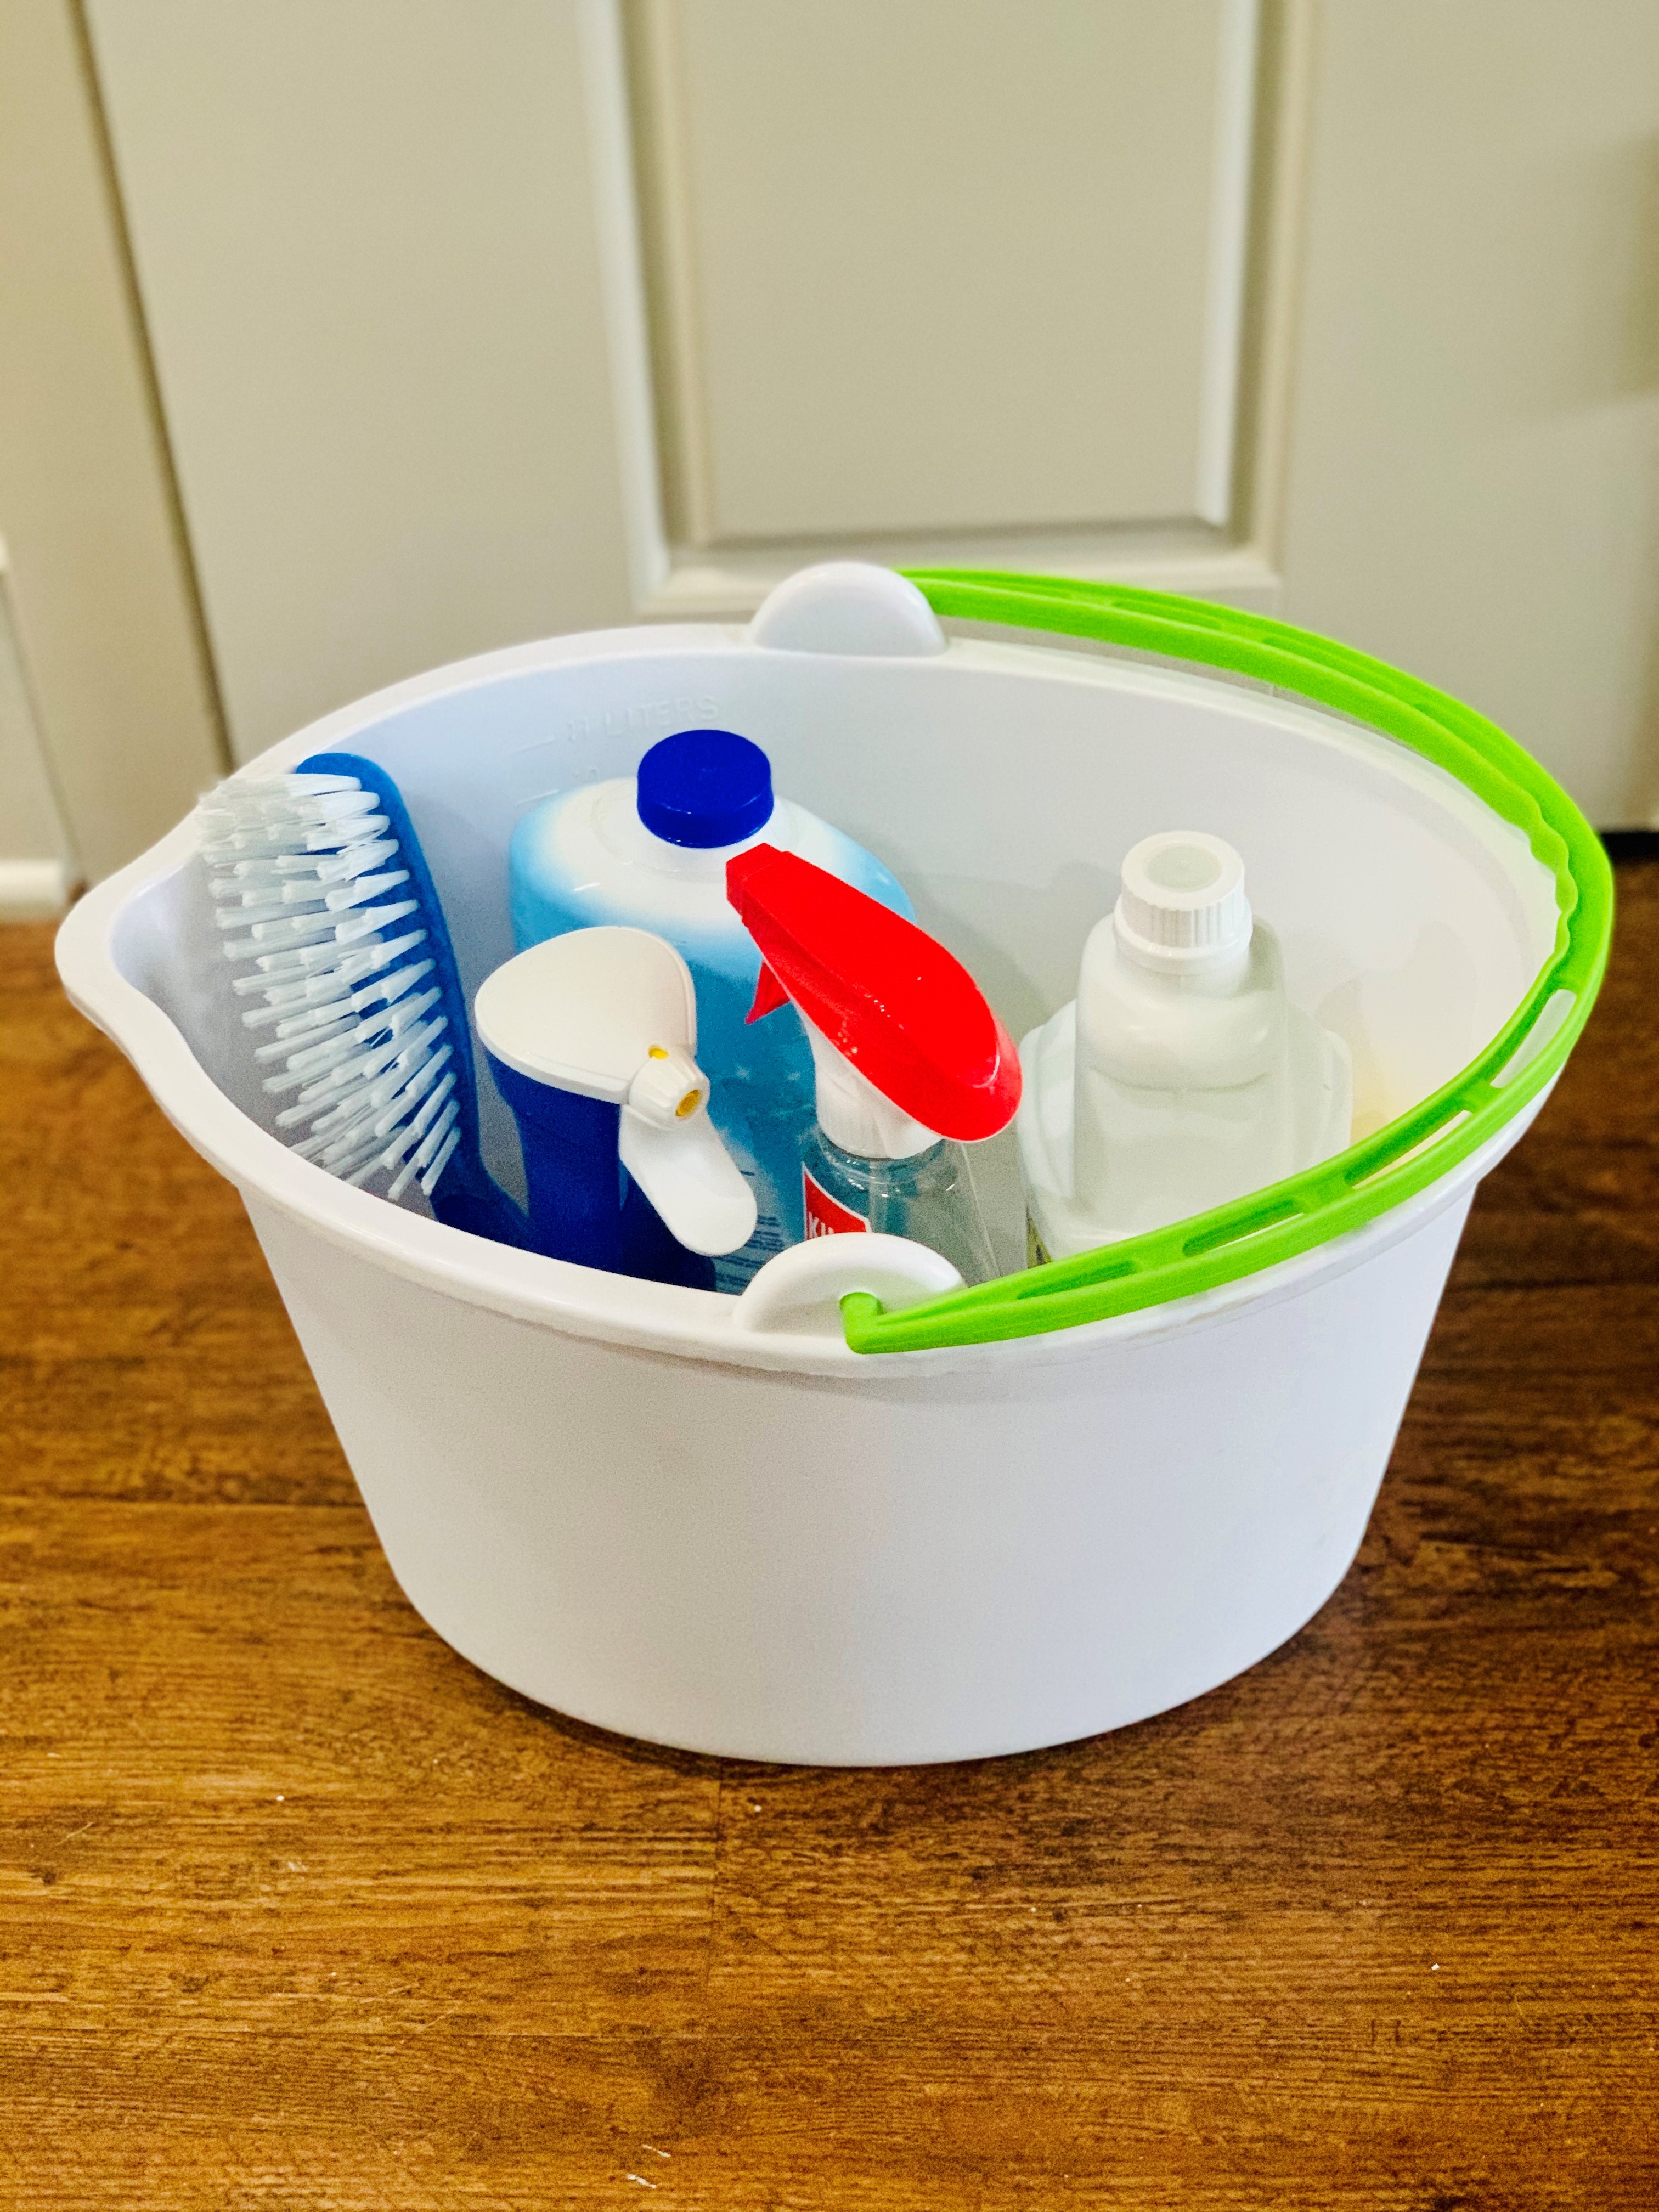 Cleaning products stored in a mop bucket